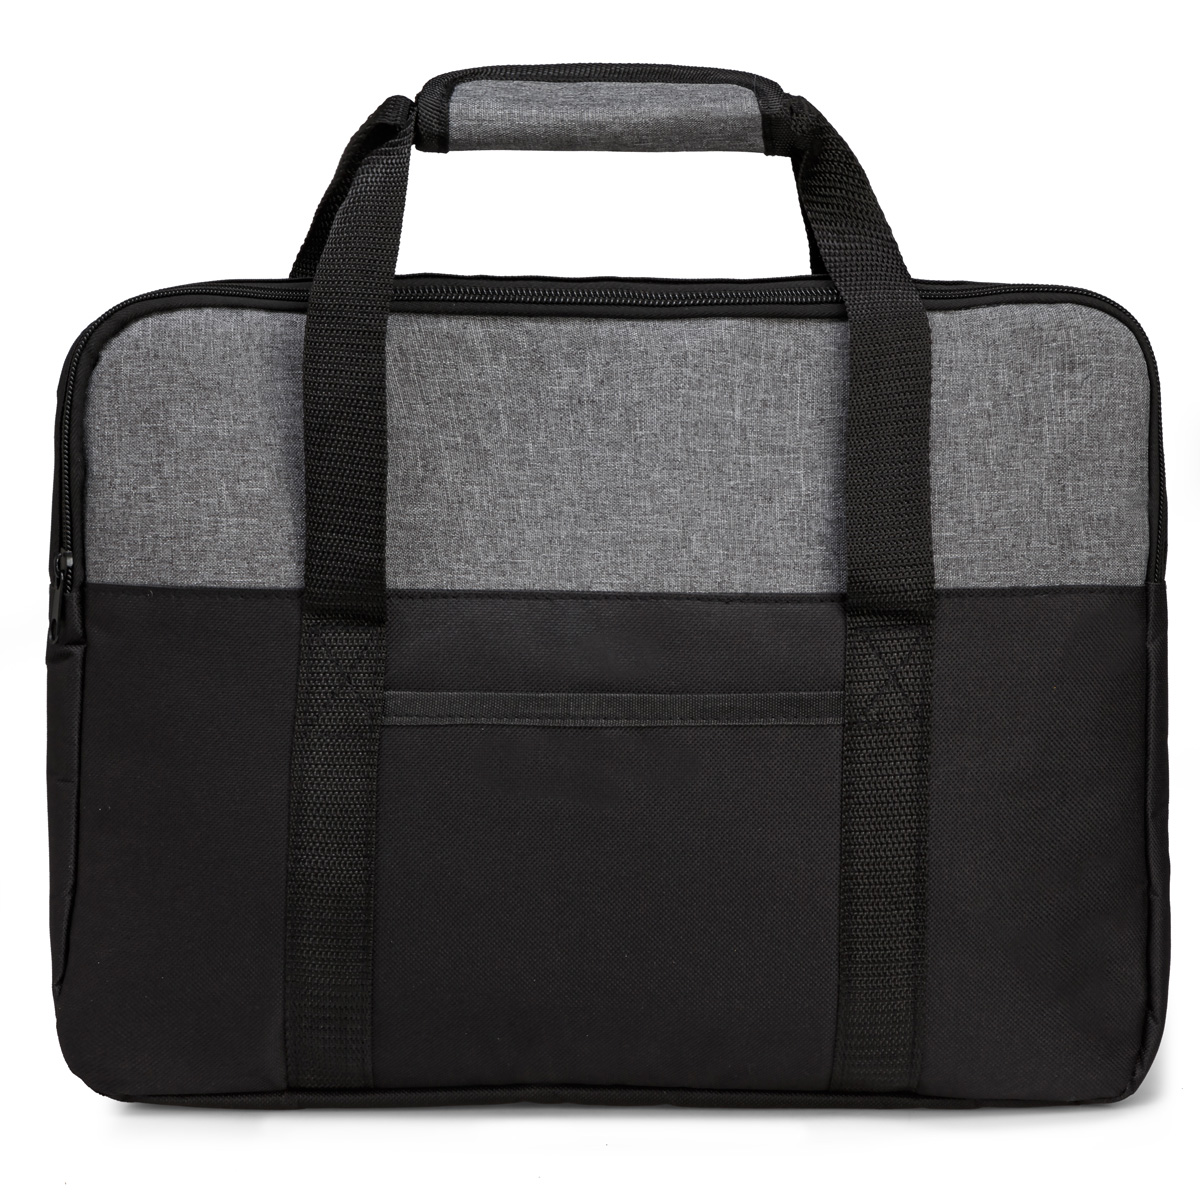 Berkshire Briefcase Product Image